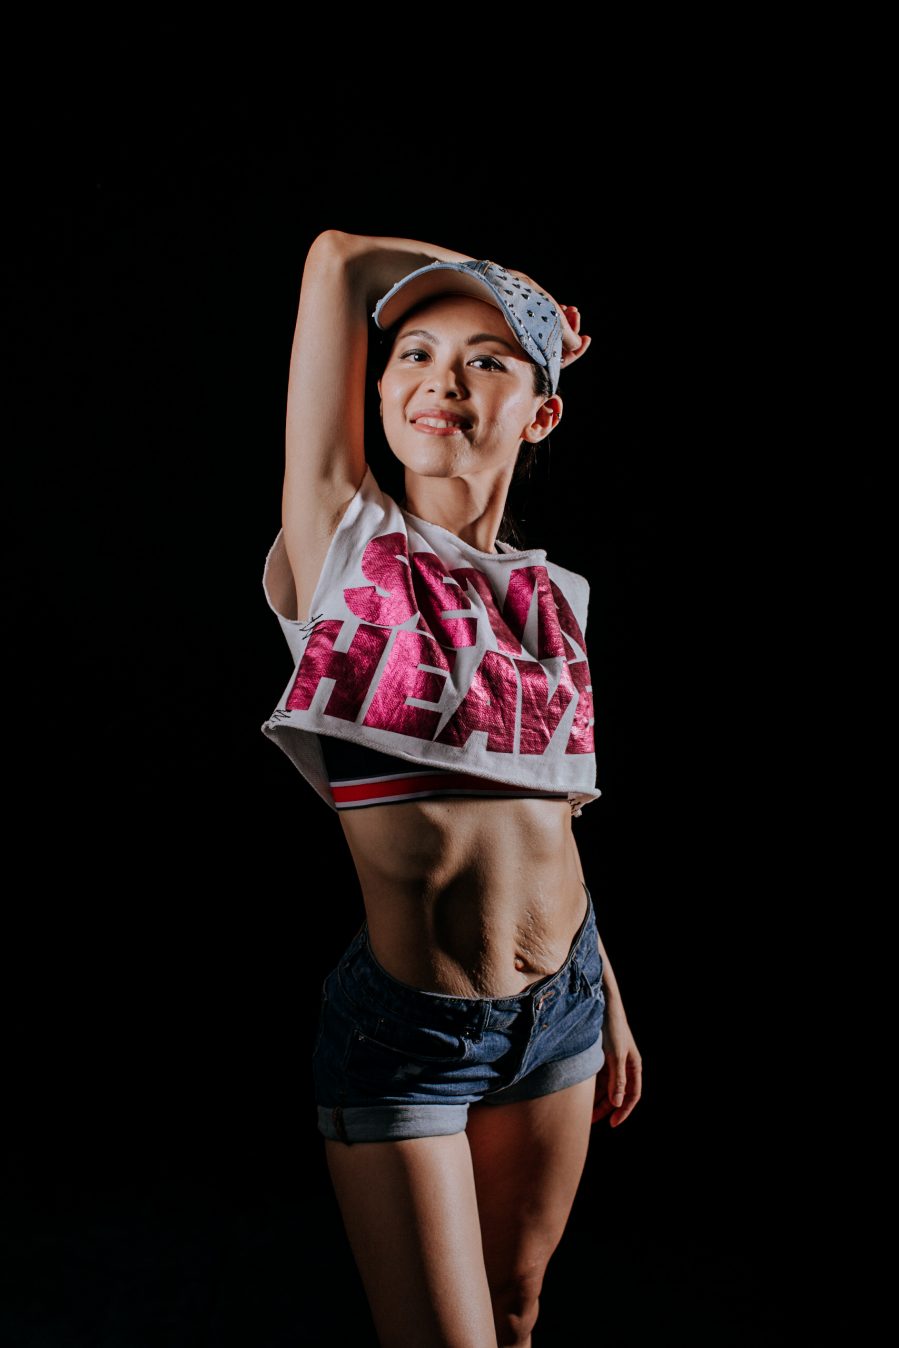 Fitness Portrait Photo Fitmom Woman Lady Studio Session Cliff Choong Photography Nike women